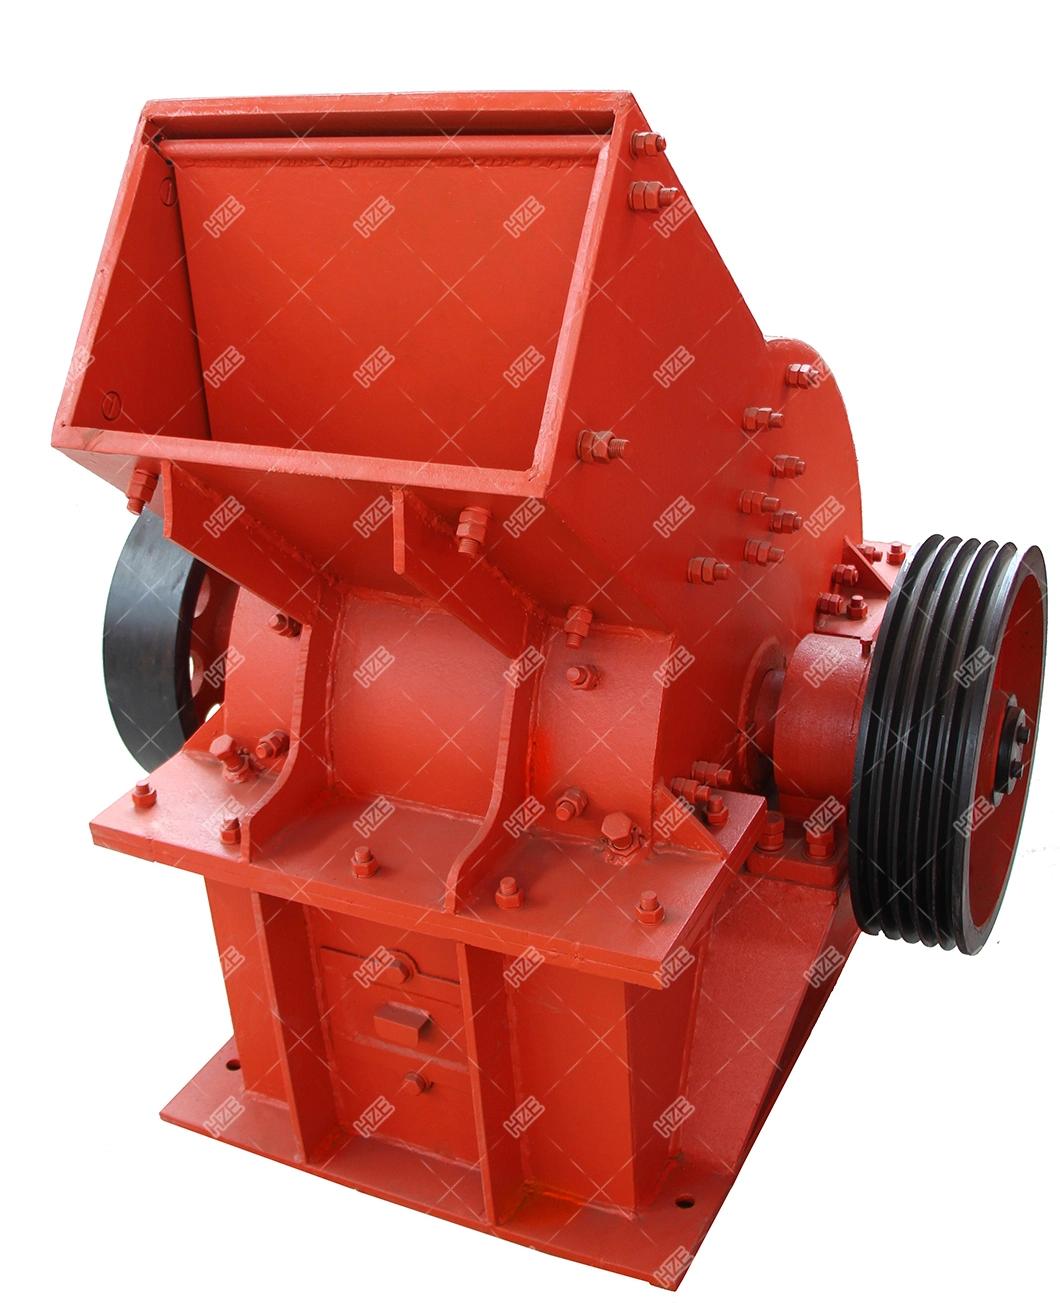 Diesel Engine Gold Ore Processing Stone / Rock Hammer Crusher